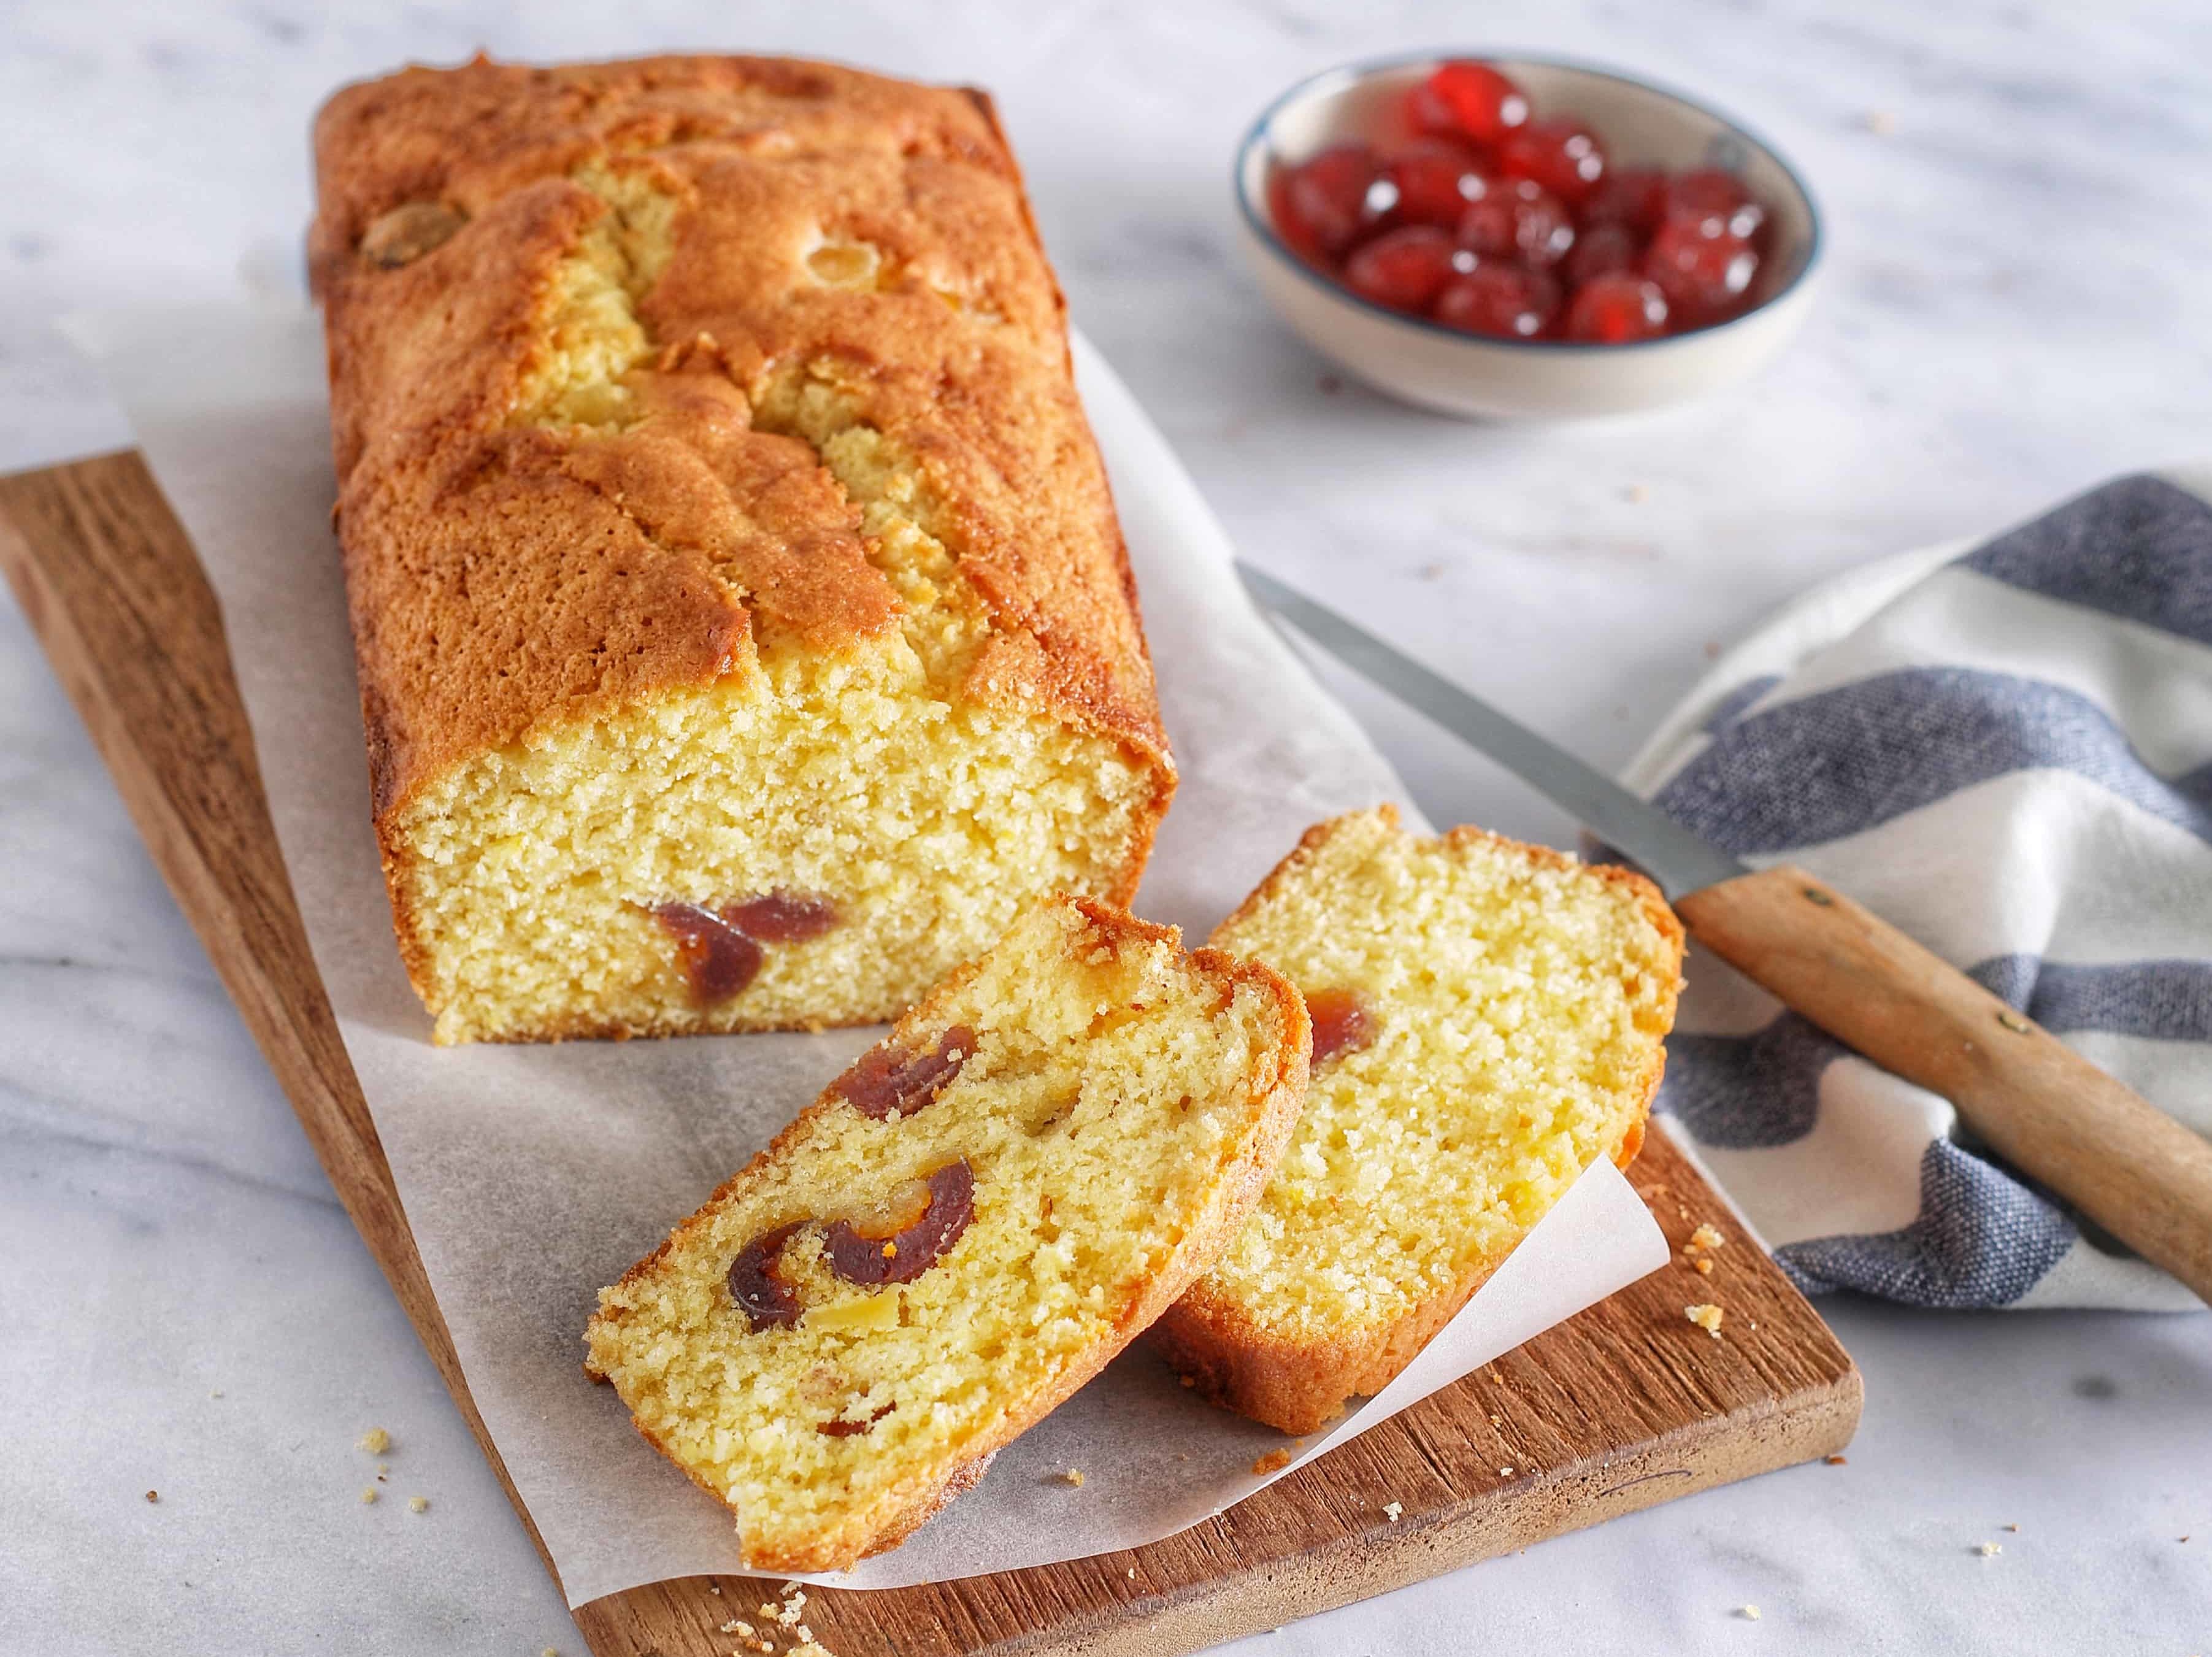 Pineapple and Cherry Loaf